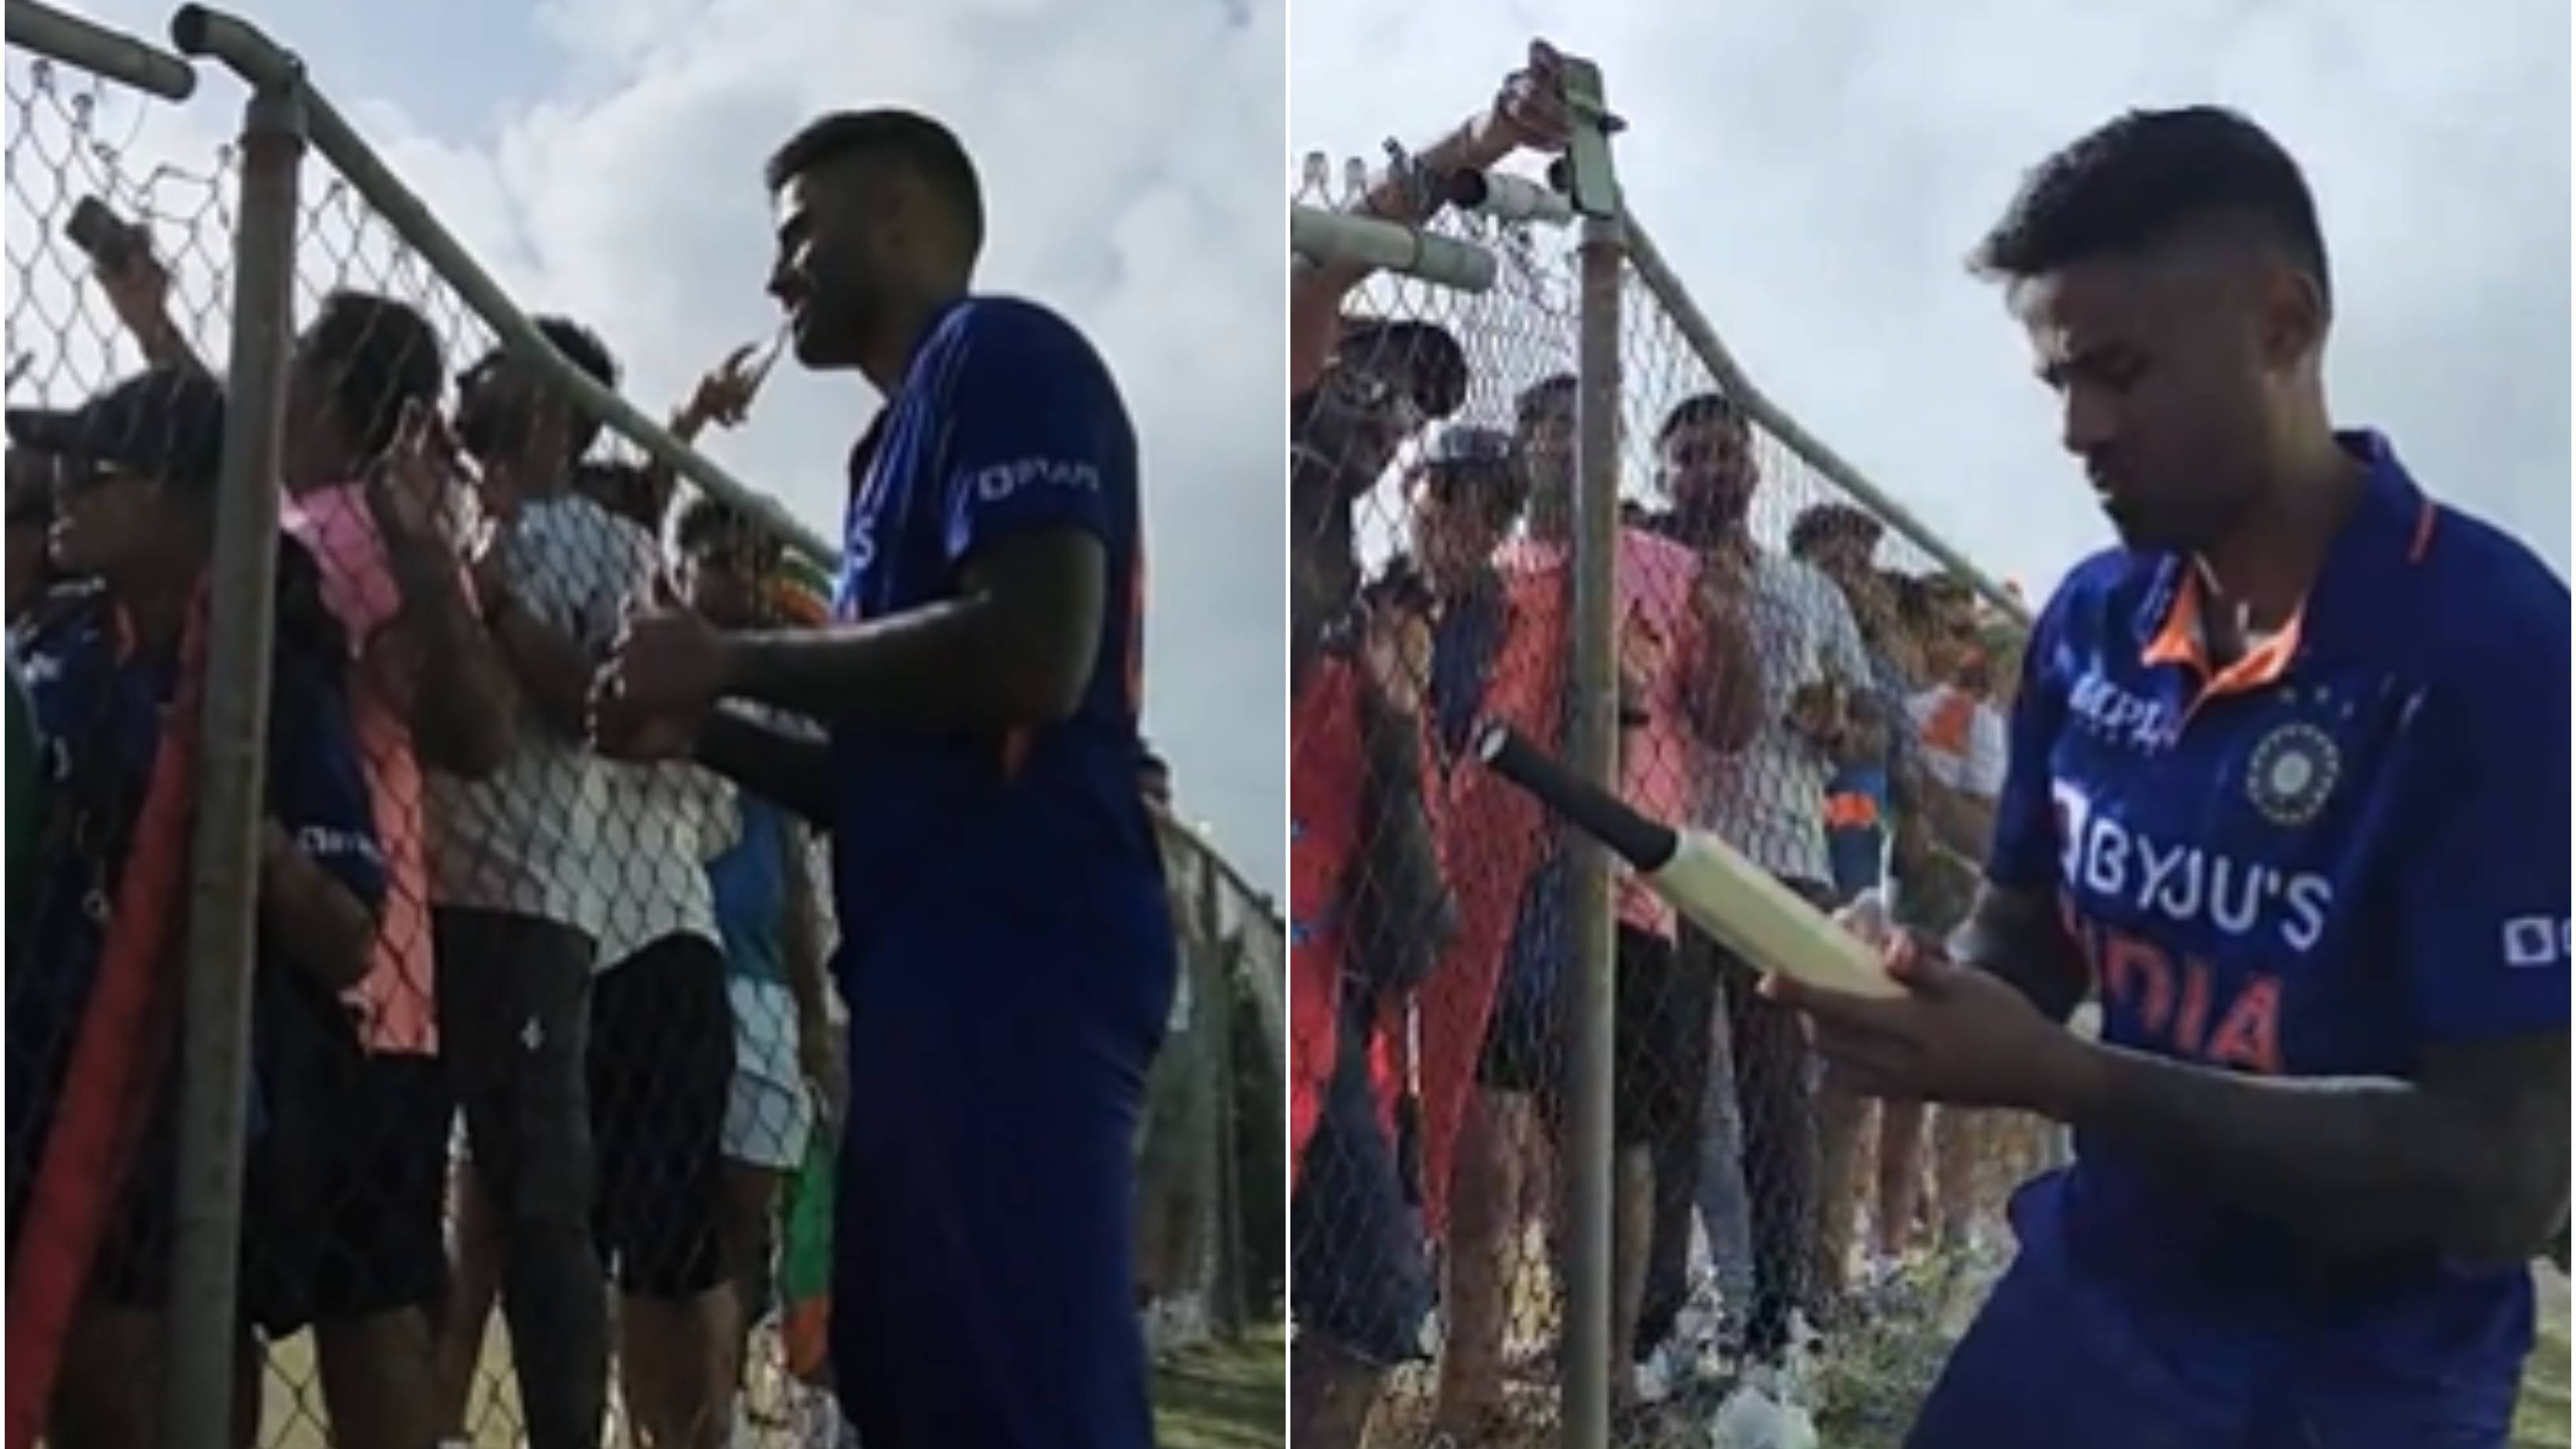 WI v IND 2022: WATCH – “Heartwarming gesture”, Suryakumar Yadav interacts with fans and signs autographs